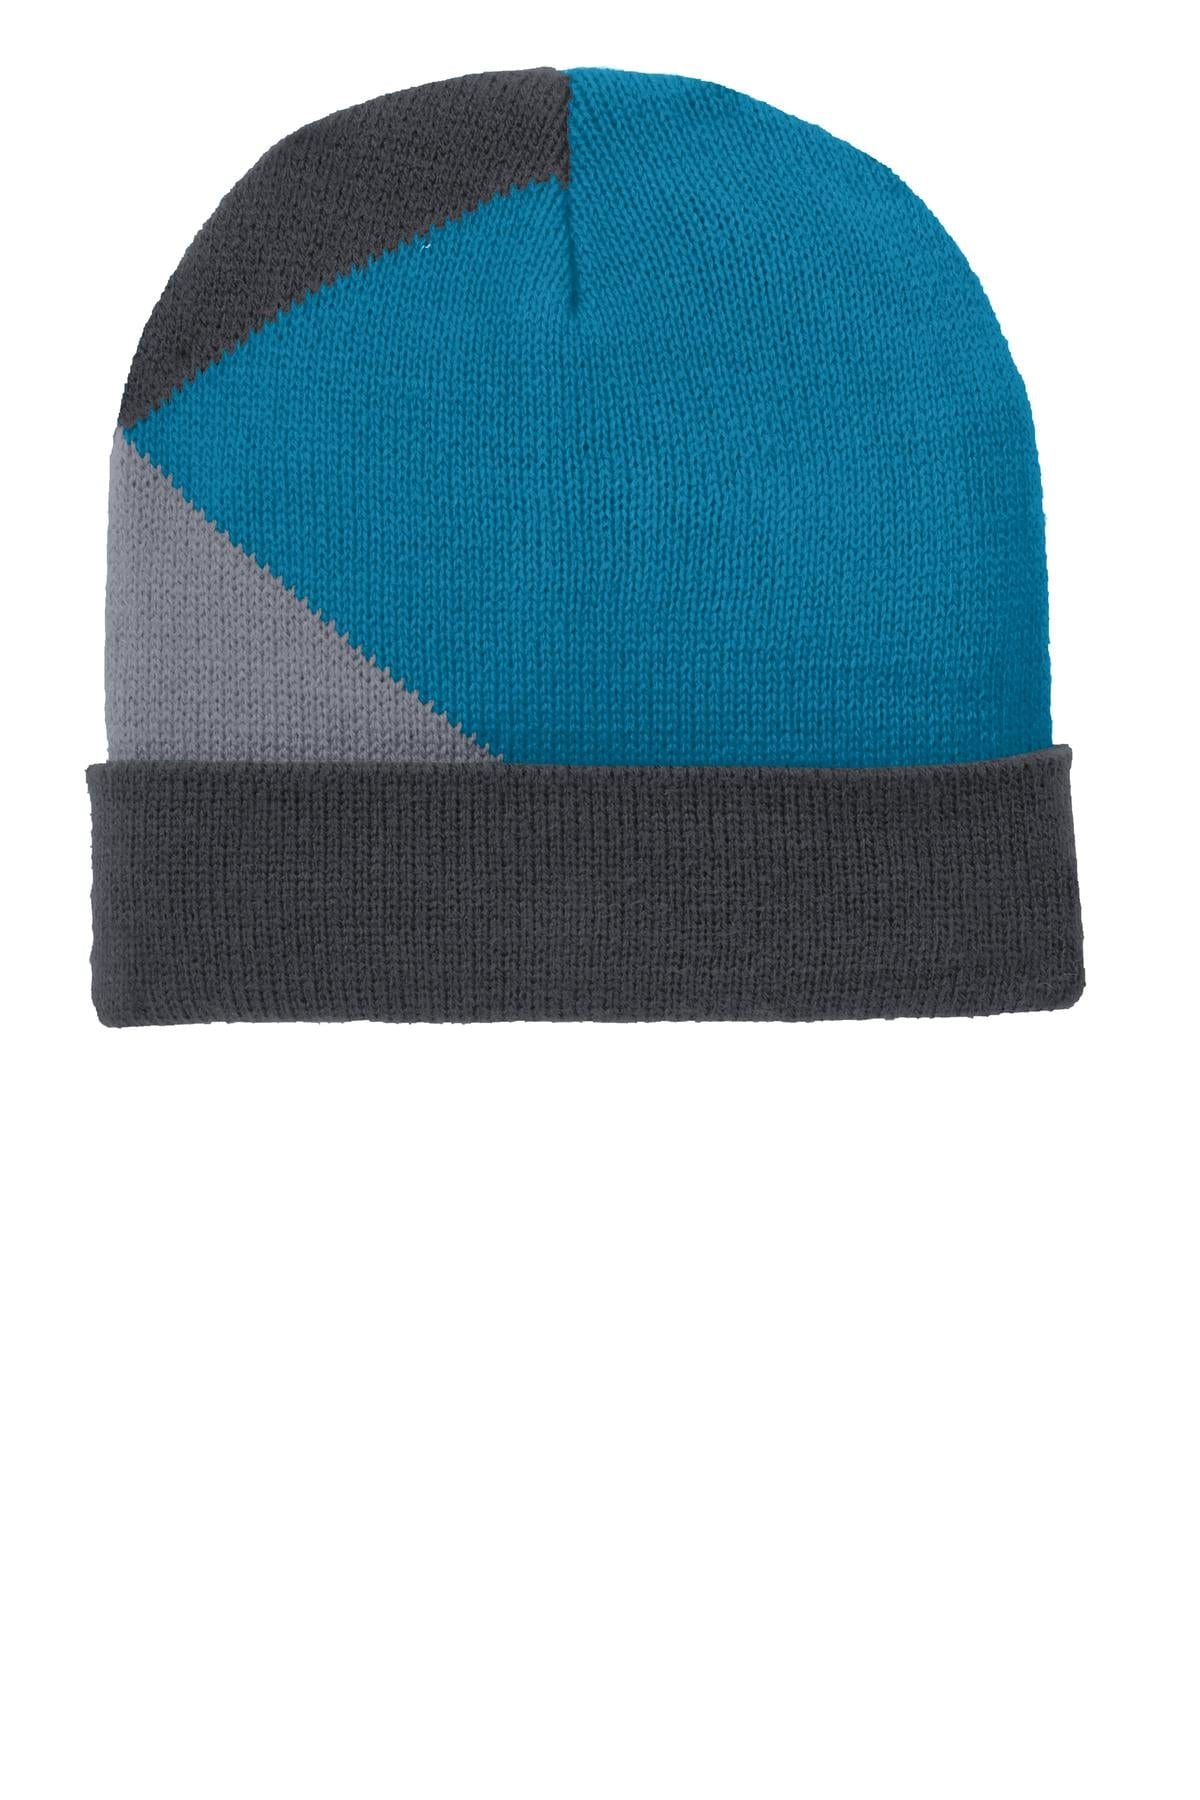 DISCONTINUED  Port Authority ®  Cuffed Colorblock Beanie. C906